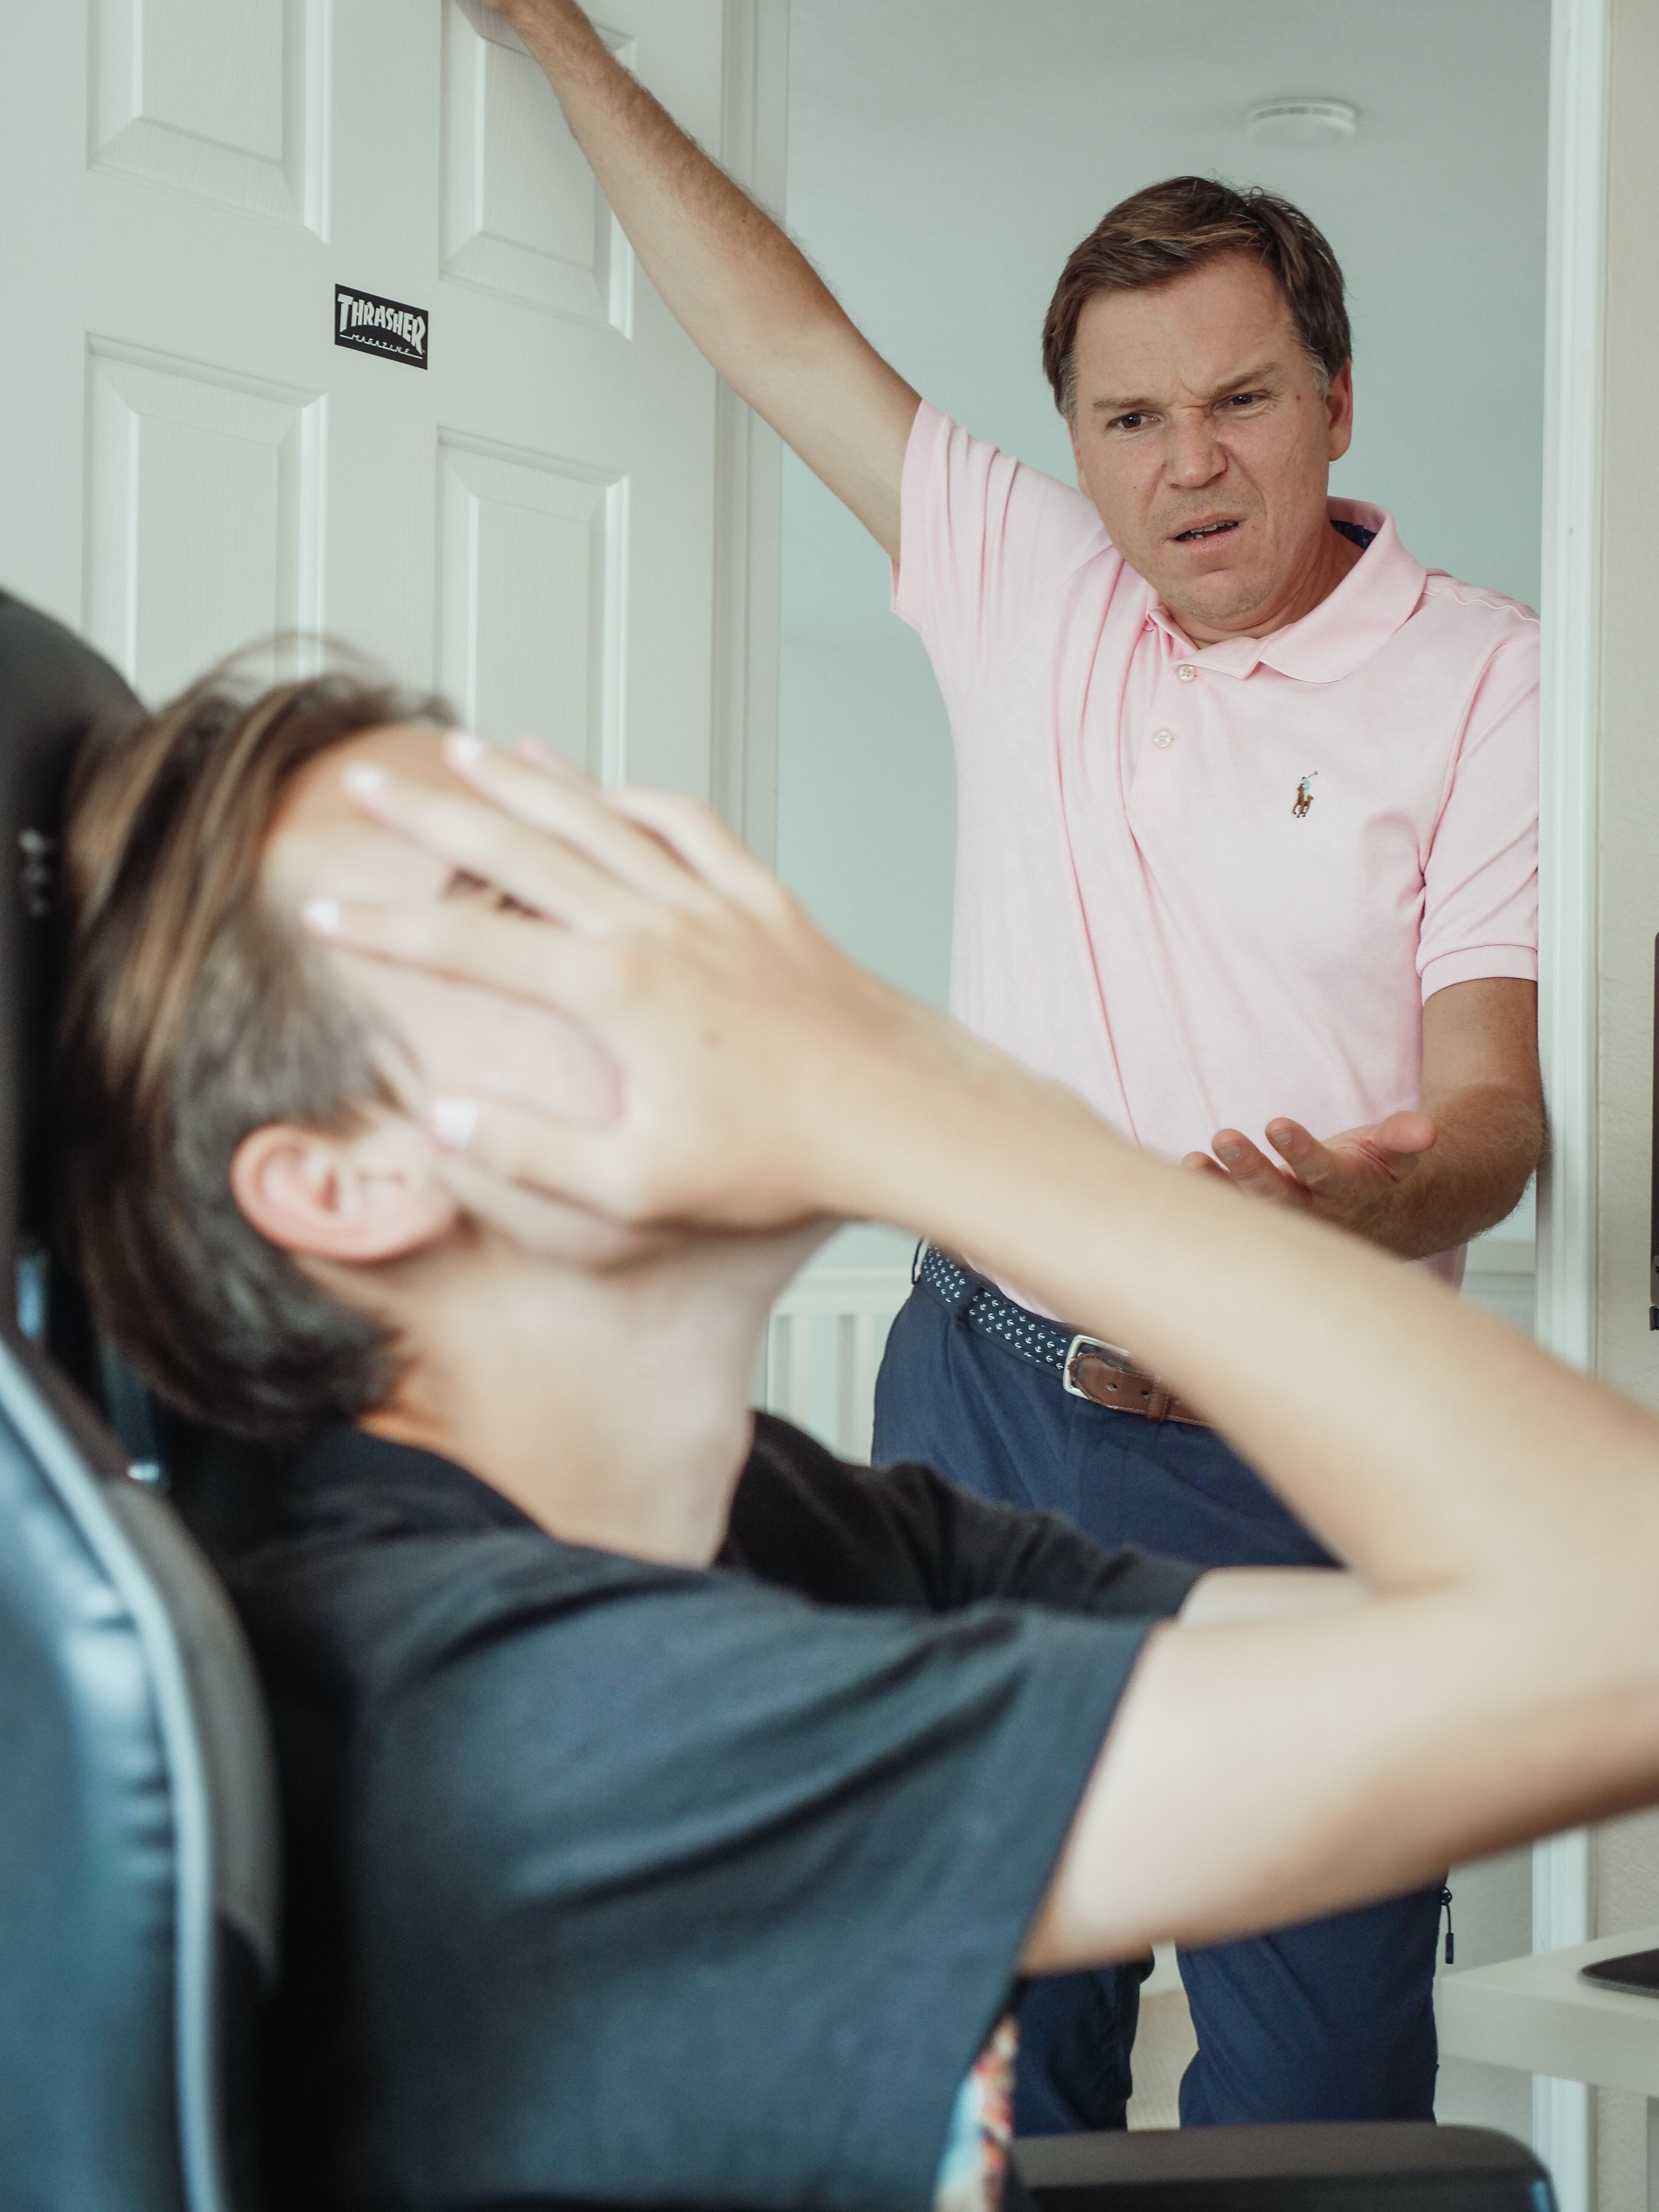 Dad worries about his son's apathy and can't seem to get through to him.